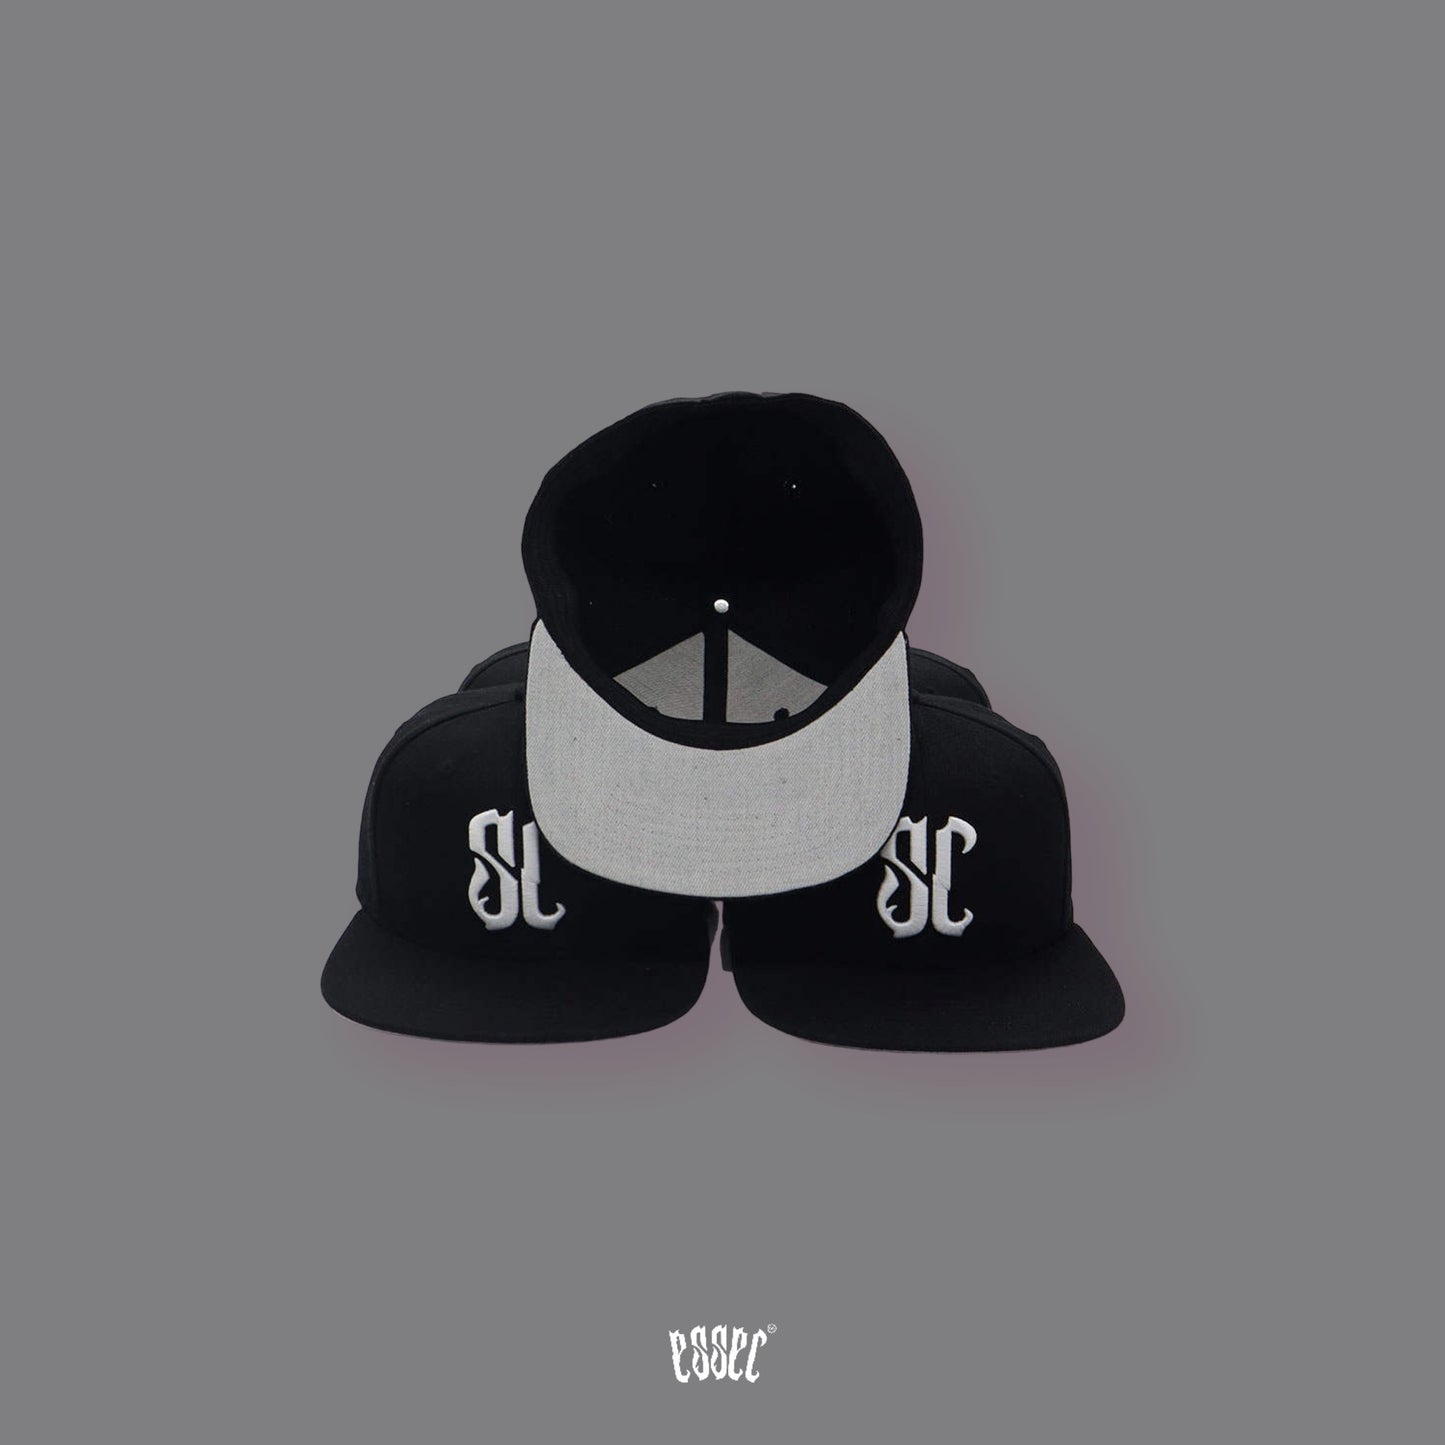 SC Black Fitted Hat